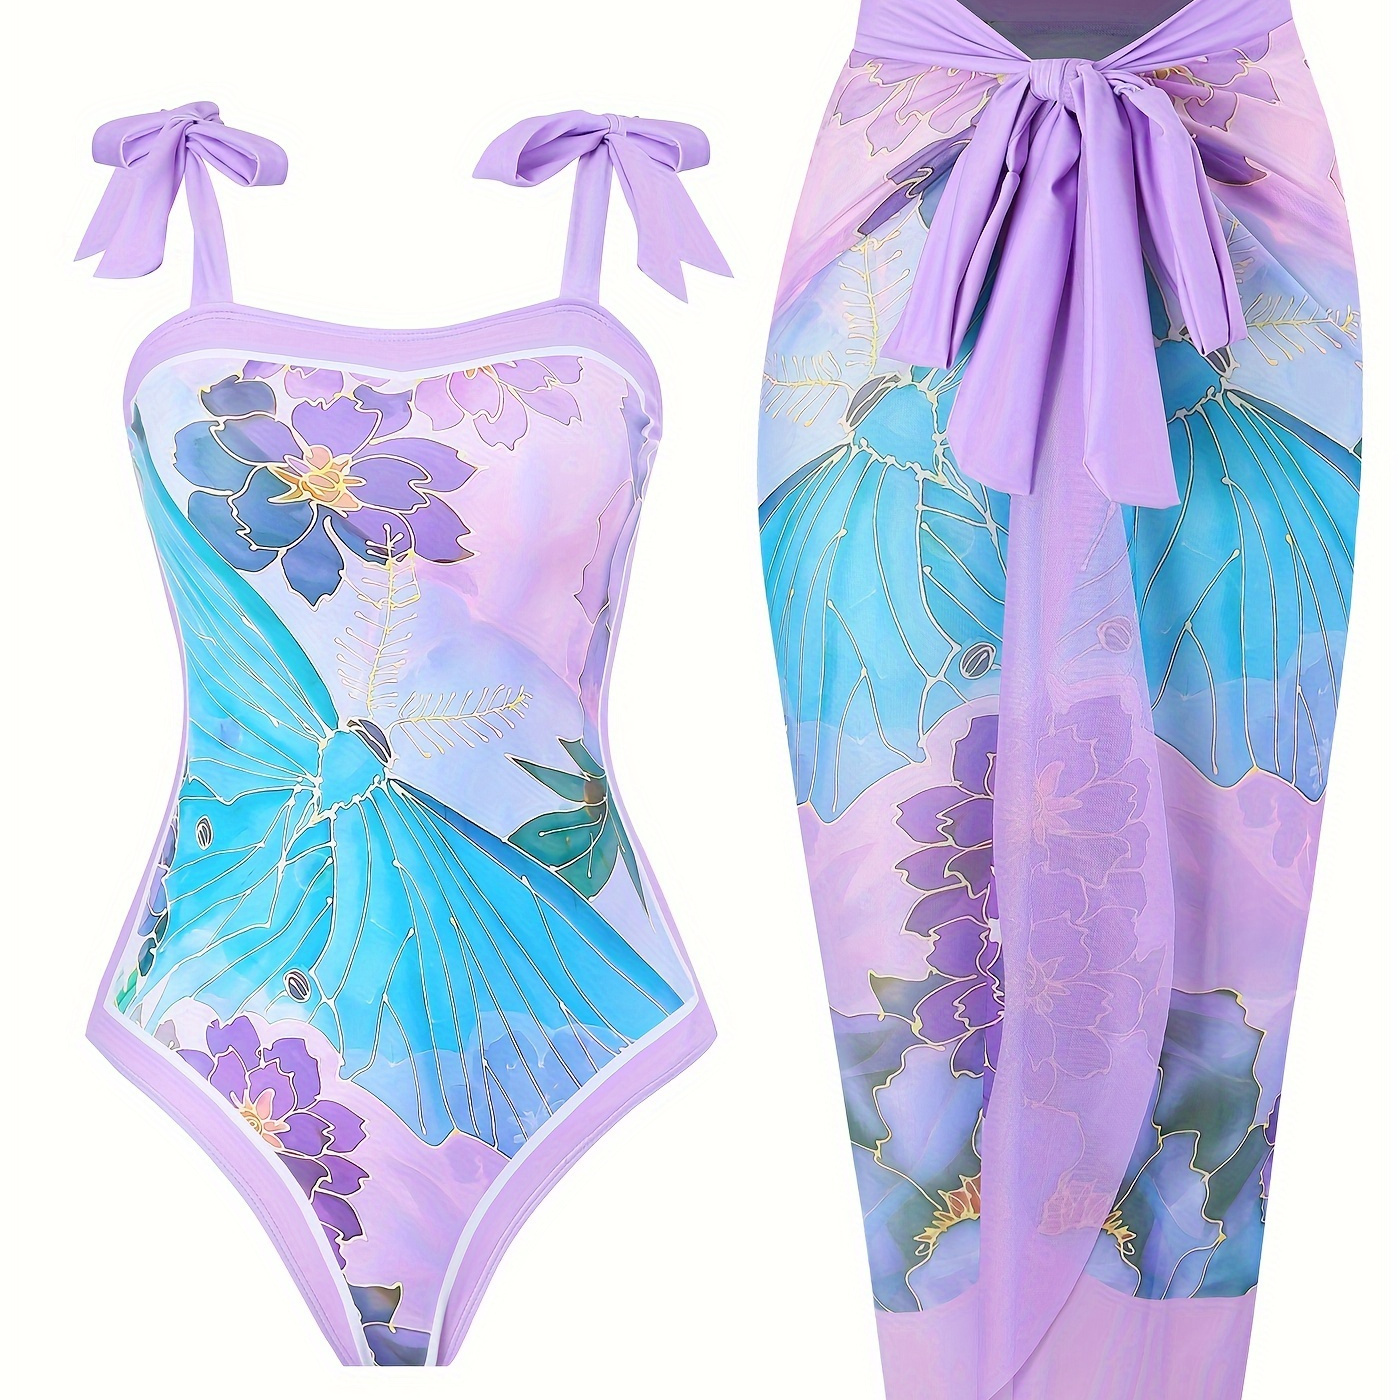 

Floral Butterfly Print Violet Elegant 2 Piece Swimsuits, Knot Shoulder High Stretch Sun Protection One-piece Bathing-suit & Cover Up Sarong Skirt, Women's Swimwear & Clothing For Holiday